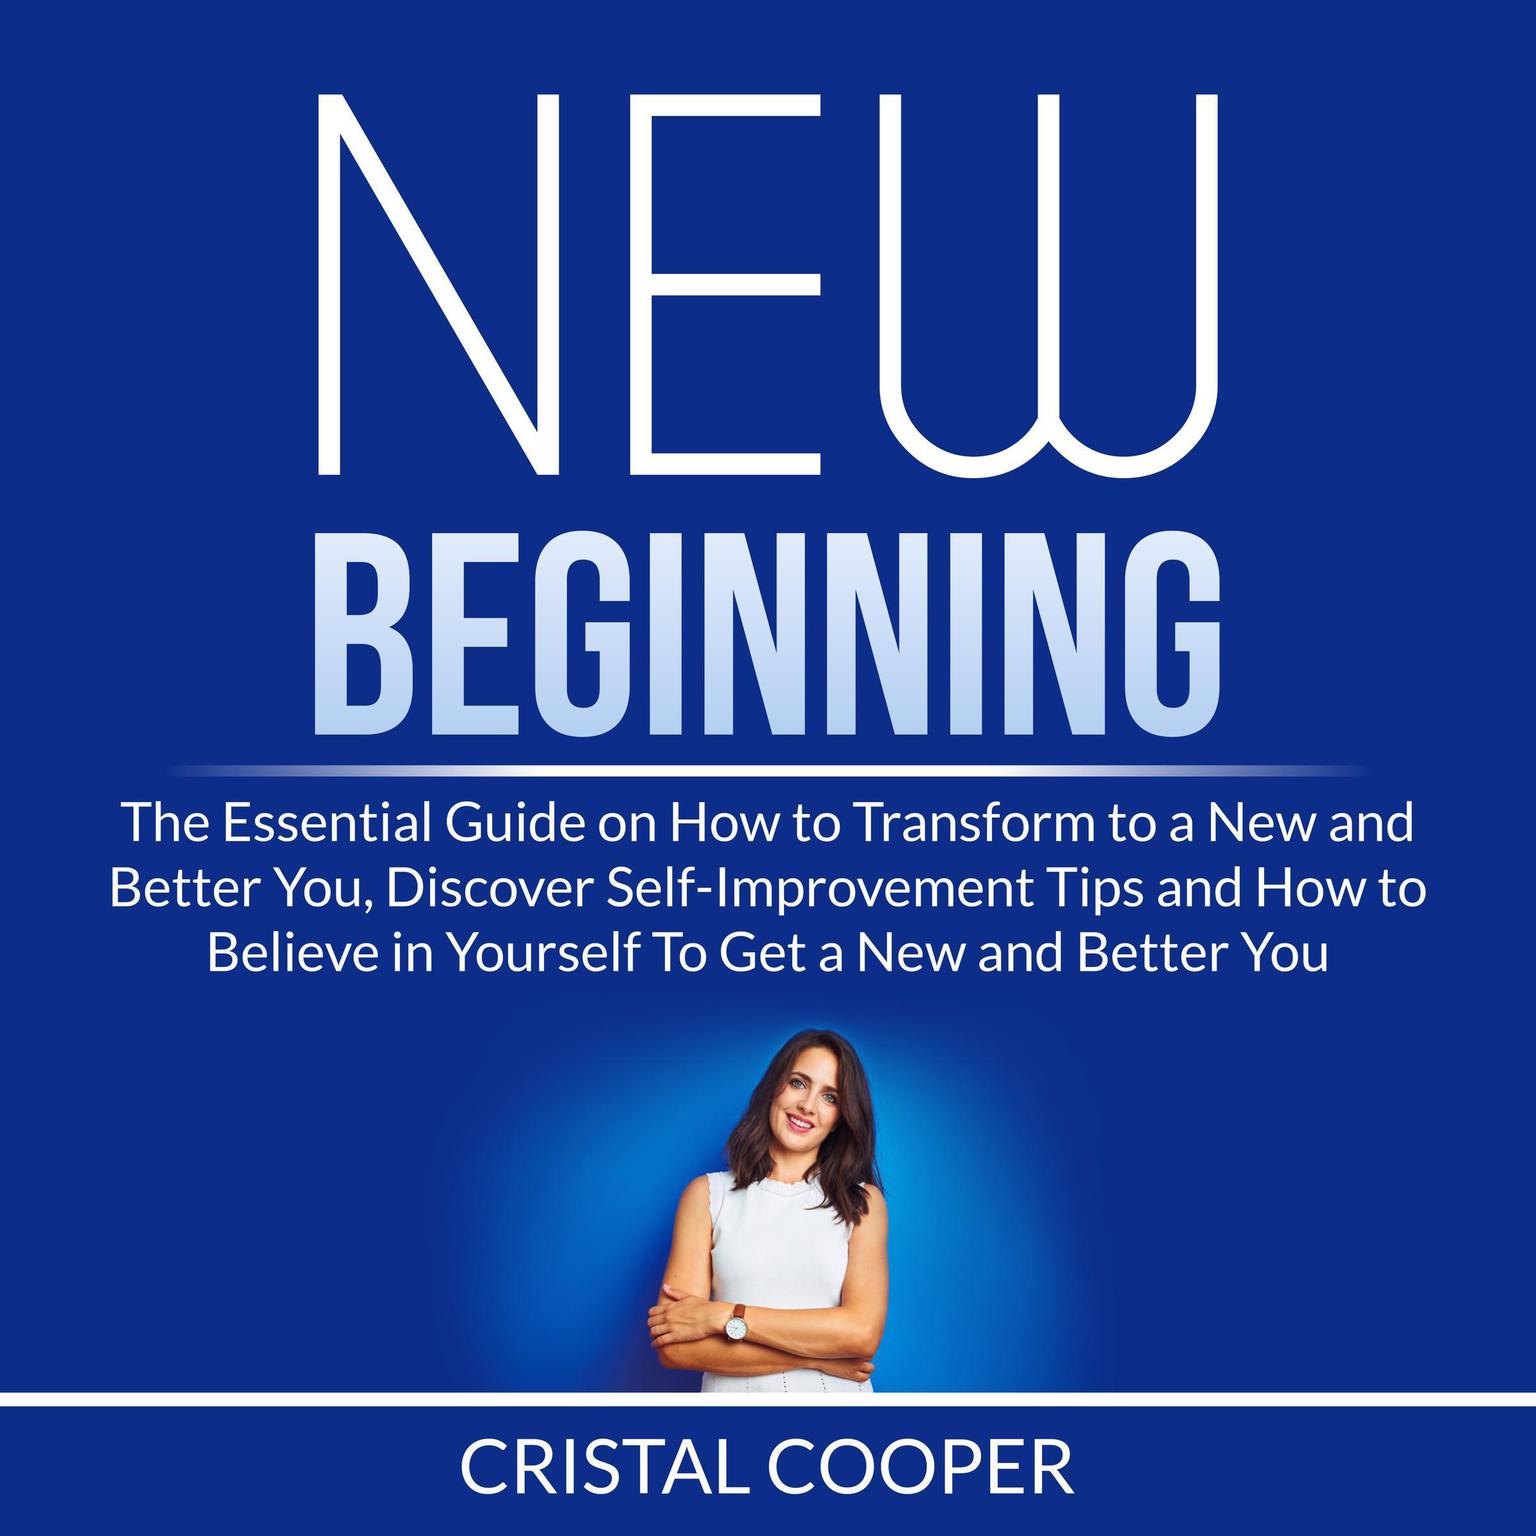 New Beginning: The Essential Guide on How to Transform to a New and Better You, Discover Self-Improvement Tips and How to Believe in Yourself To Get a New and Better You Audiobook, by Cristal Cooper